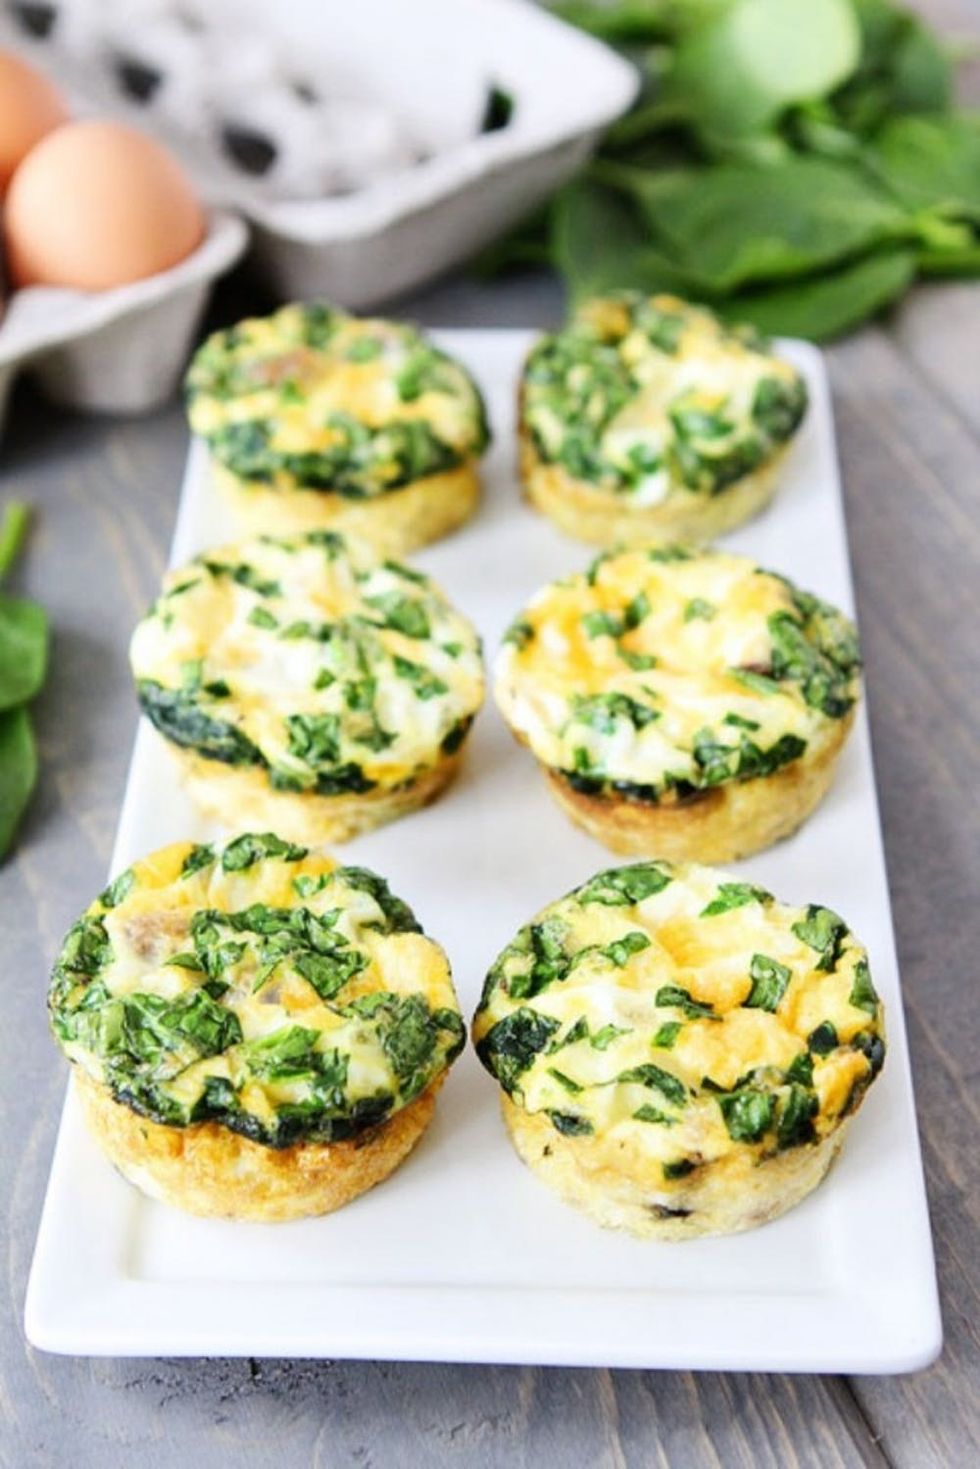 Egg Muffins With Sausage, Spinach, and Cheese